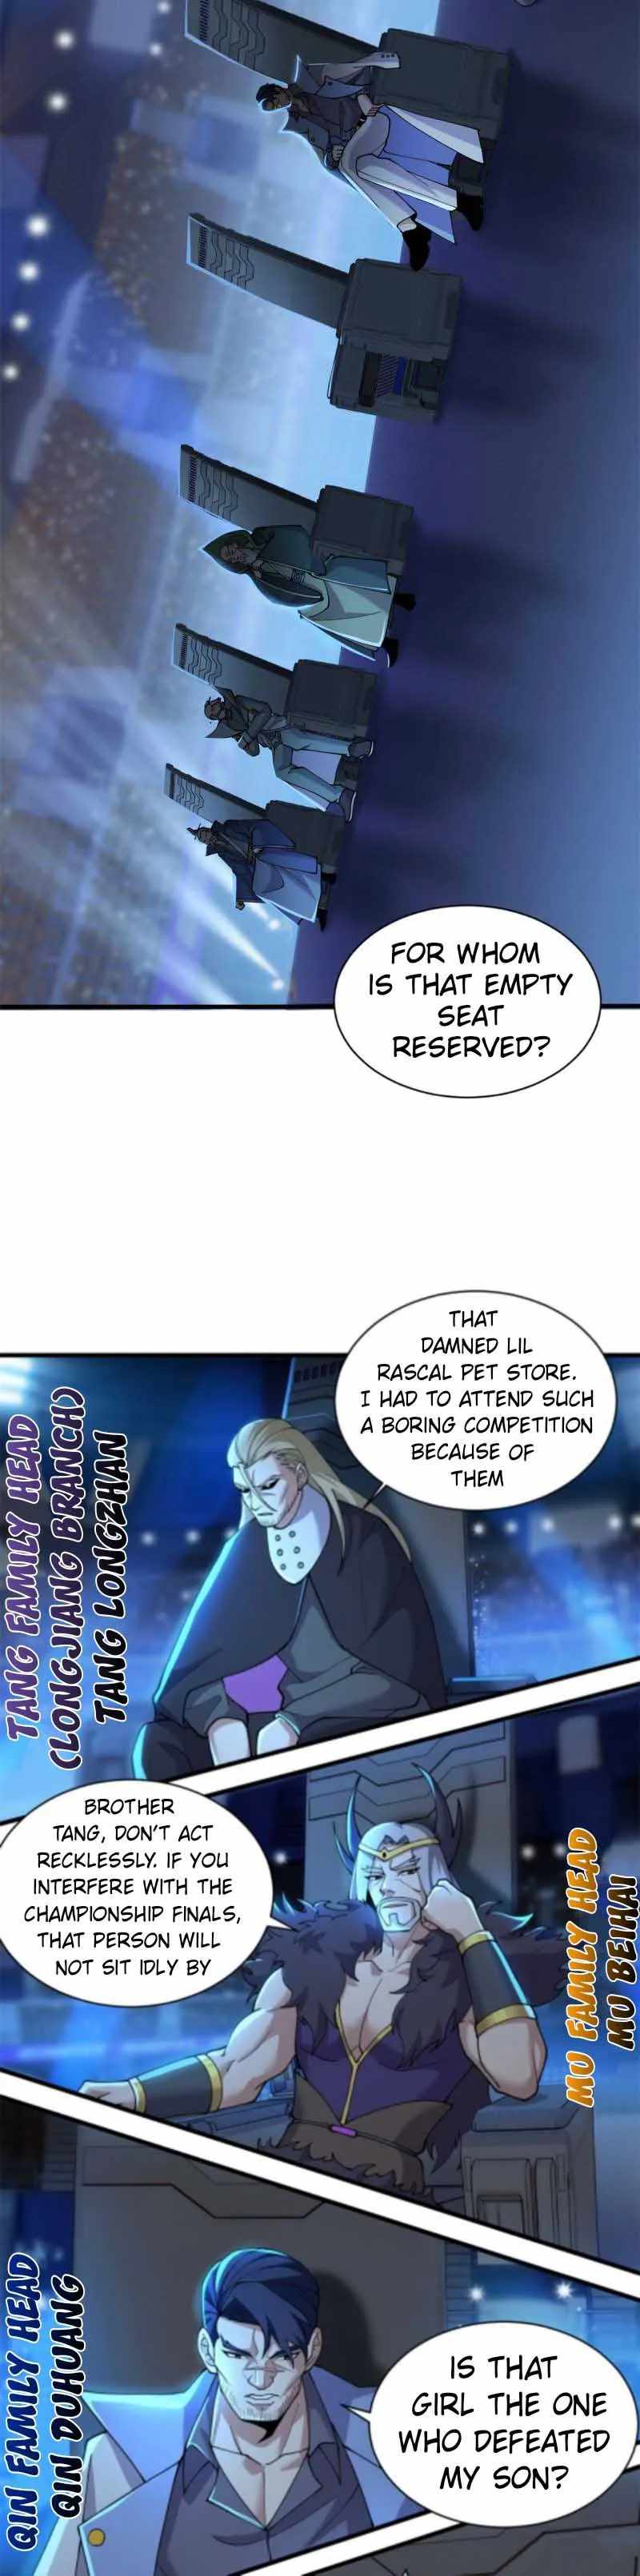 Astral Pet Store - Page 2